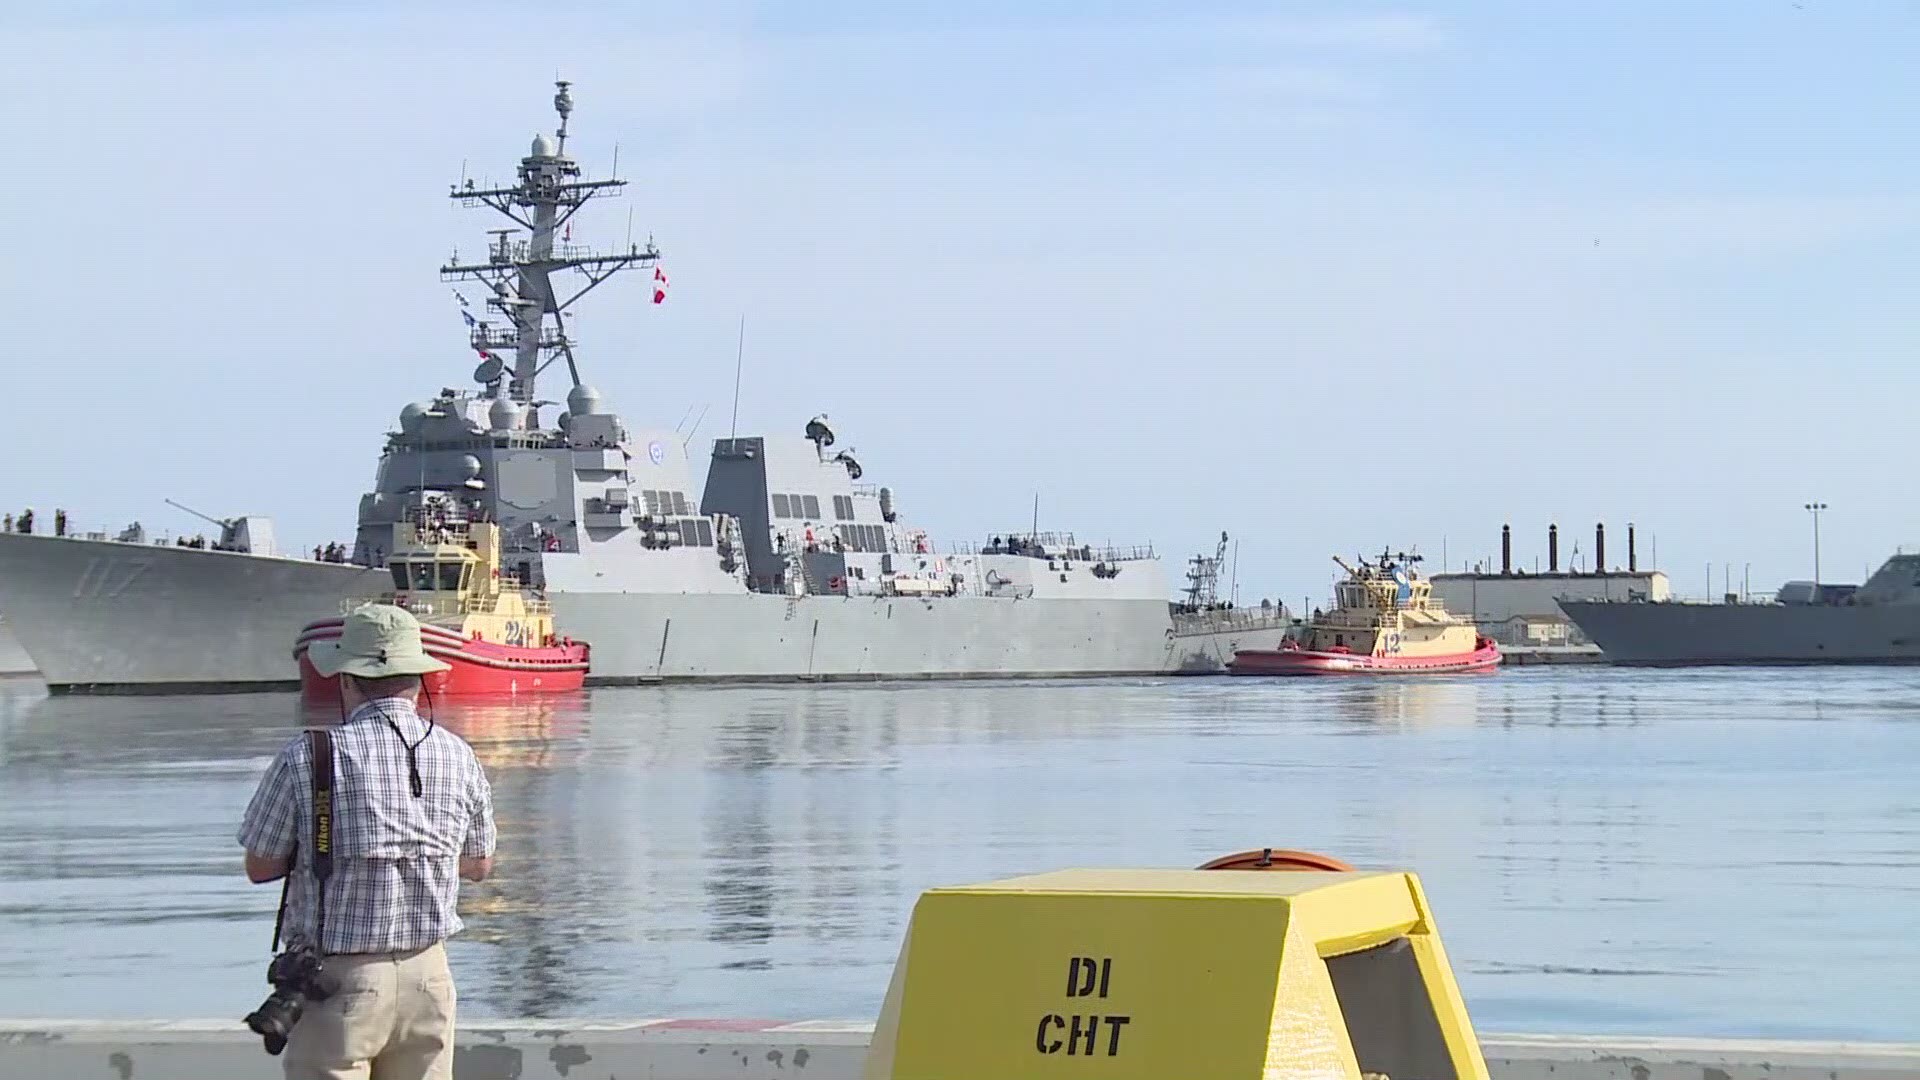 The USS Paul Ignatius (DDG 117) arrived at its new home at Naval Station Mayport on Wednesday morning. Paul Ignatius arrived around 9 a.m. after being commissioned in Fort Lauderdale on July 27.